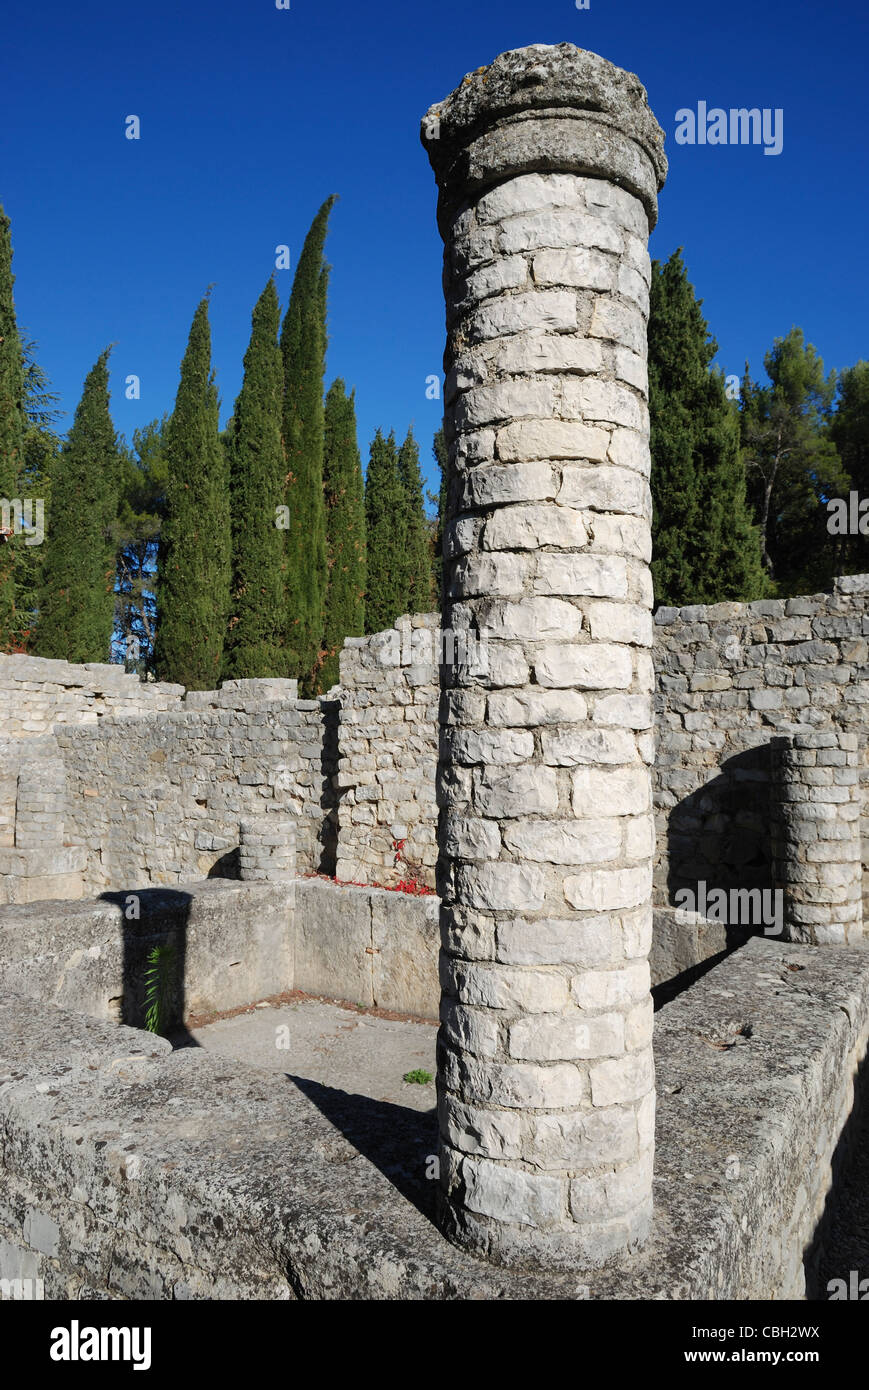 The Roman archaeological site of Puymin at Vaison-la-Romaine, Vaucluse, Provence, France. Stock Photo